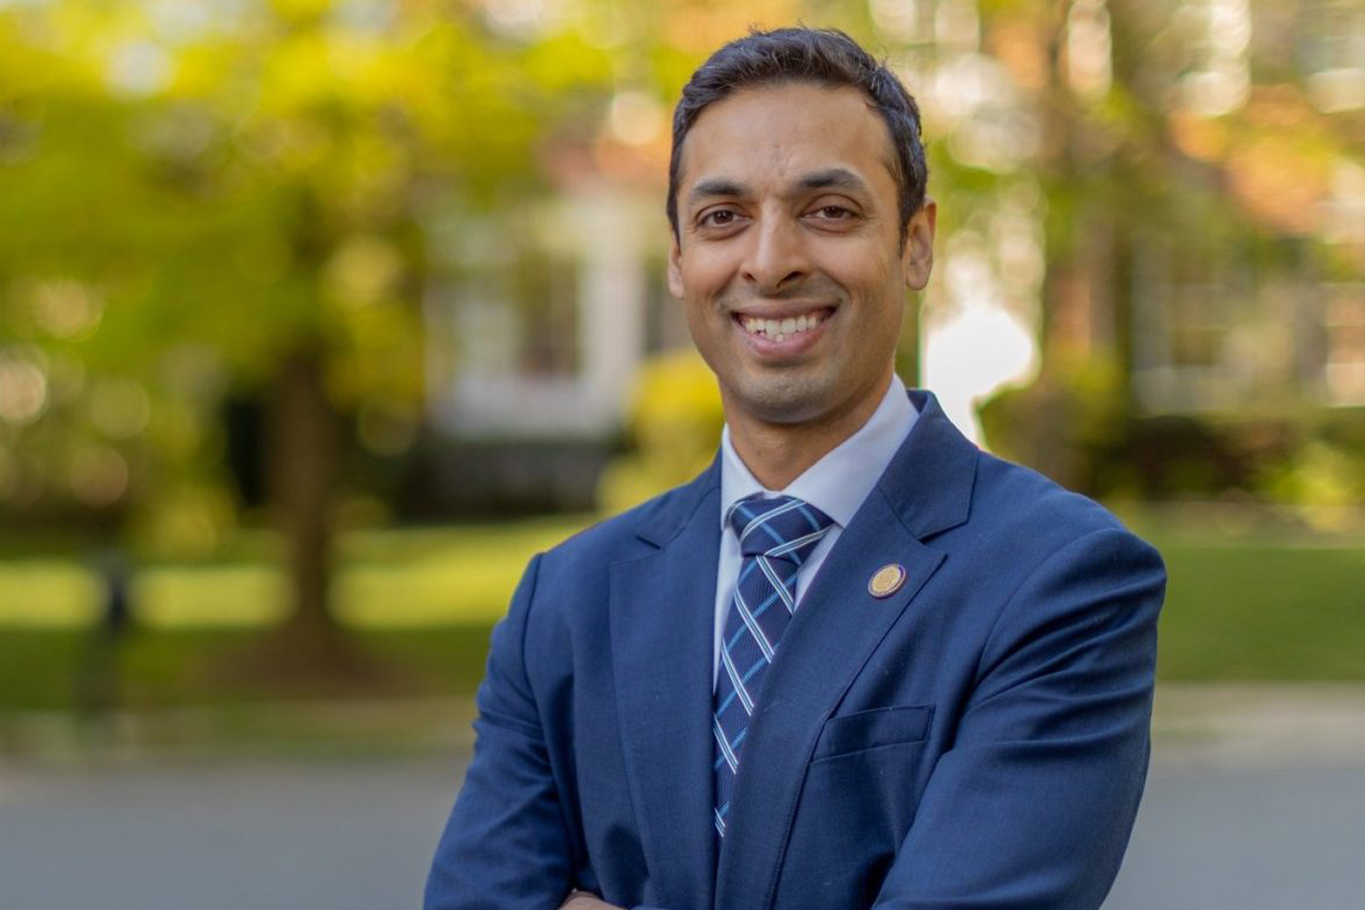 Suhas Subramanyam Receives Endorsement from Indian American Impact Fund.